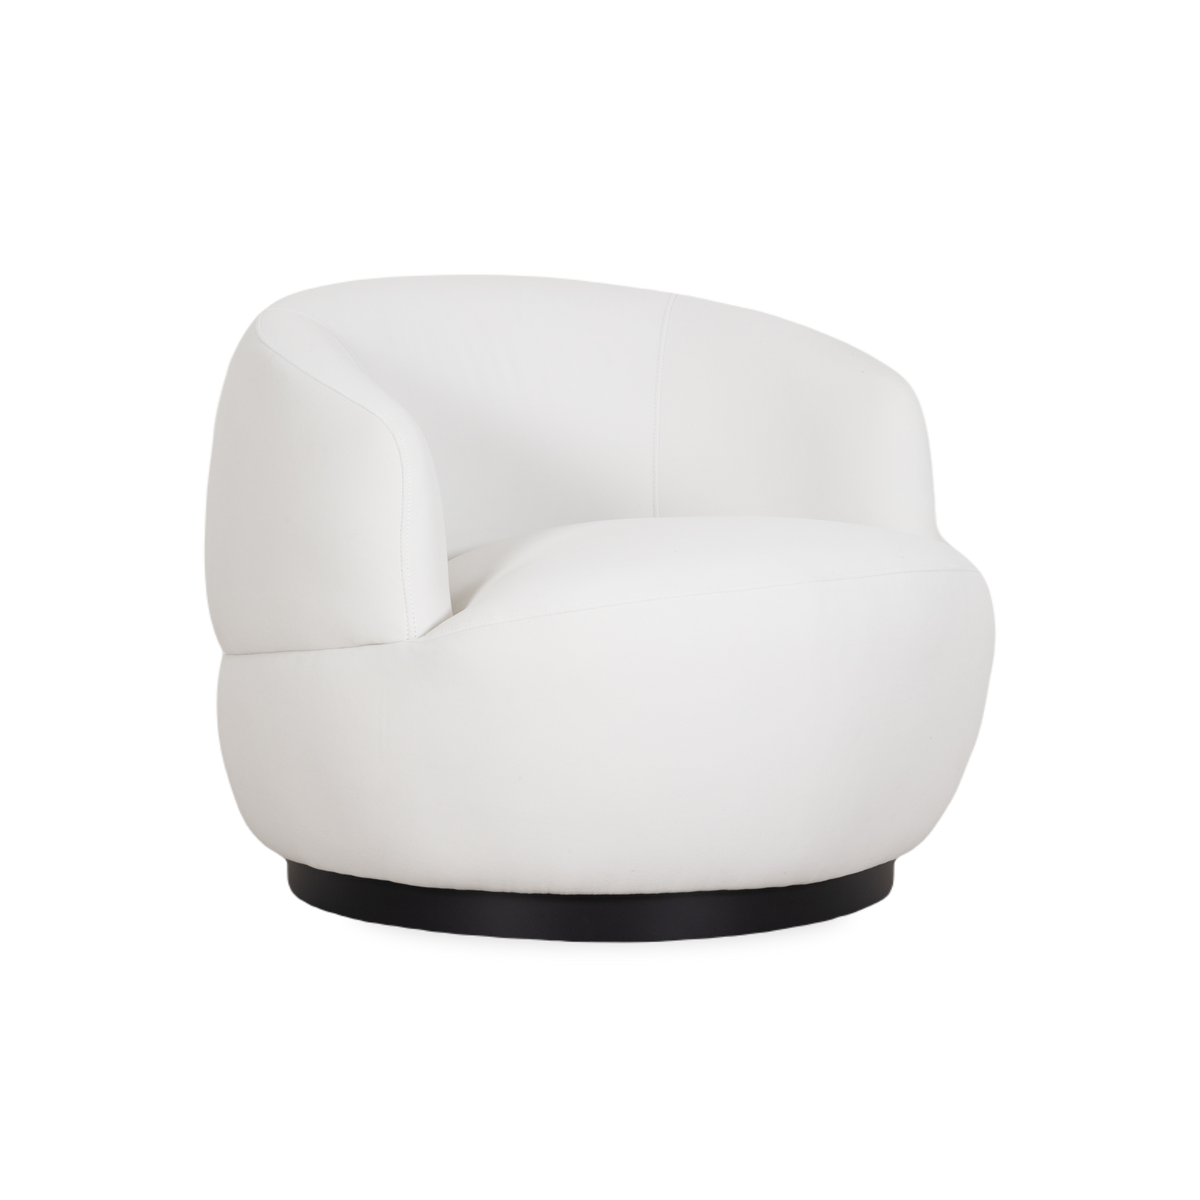 Taking cues from Italian post-modern design, the Clive Chair adds a stylish to any space.